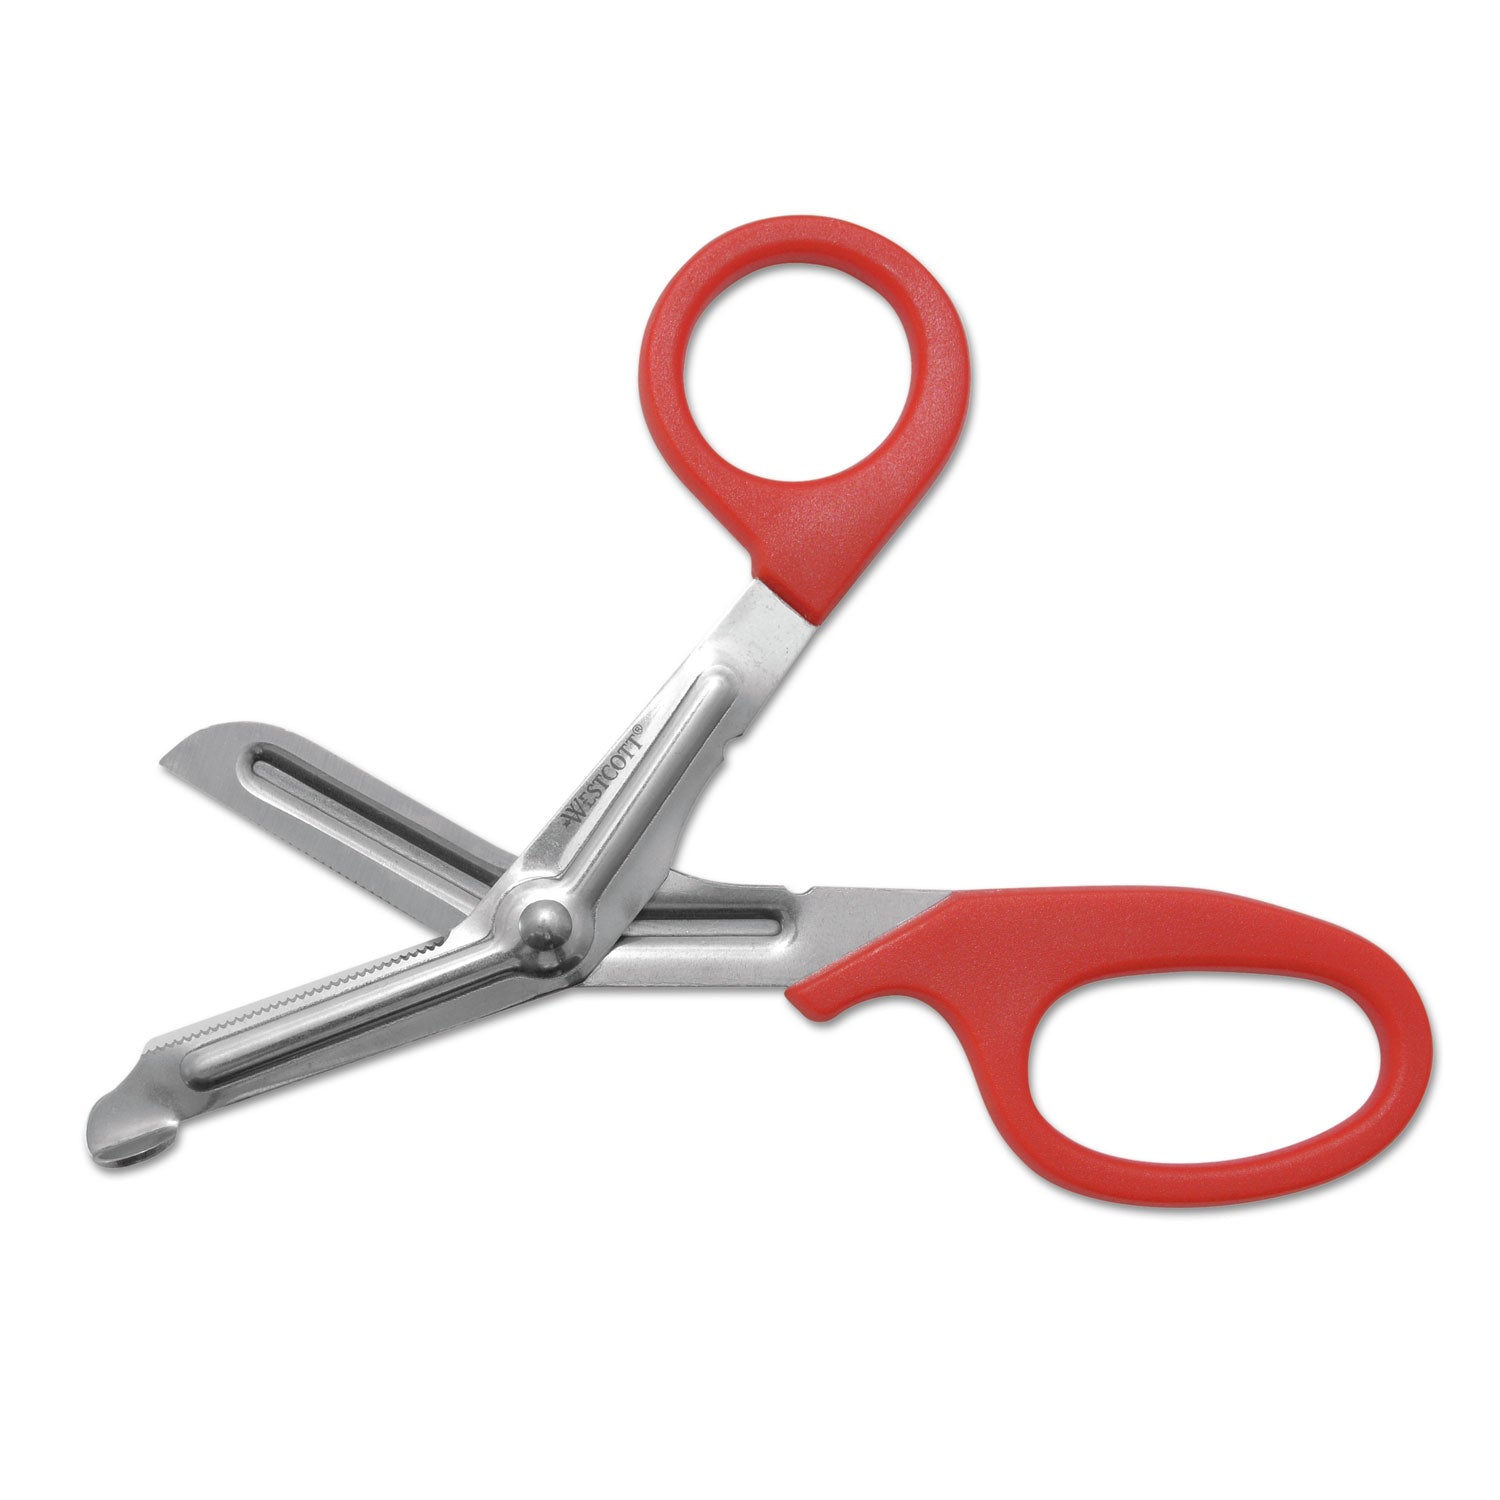 Stainless Steel Office Snips, 7" Long, 1.75" Cut Length, Red Offset Handle - 